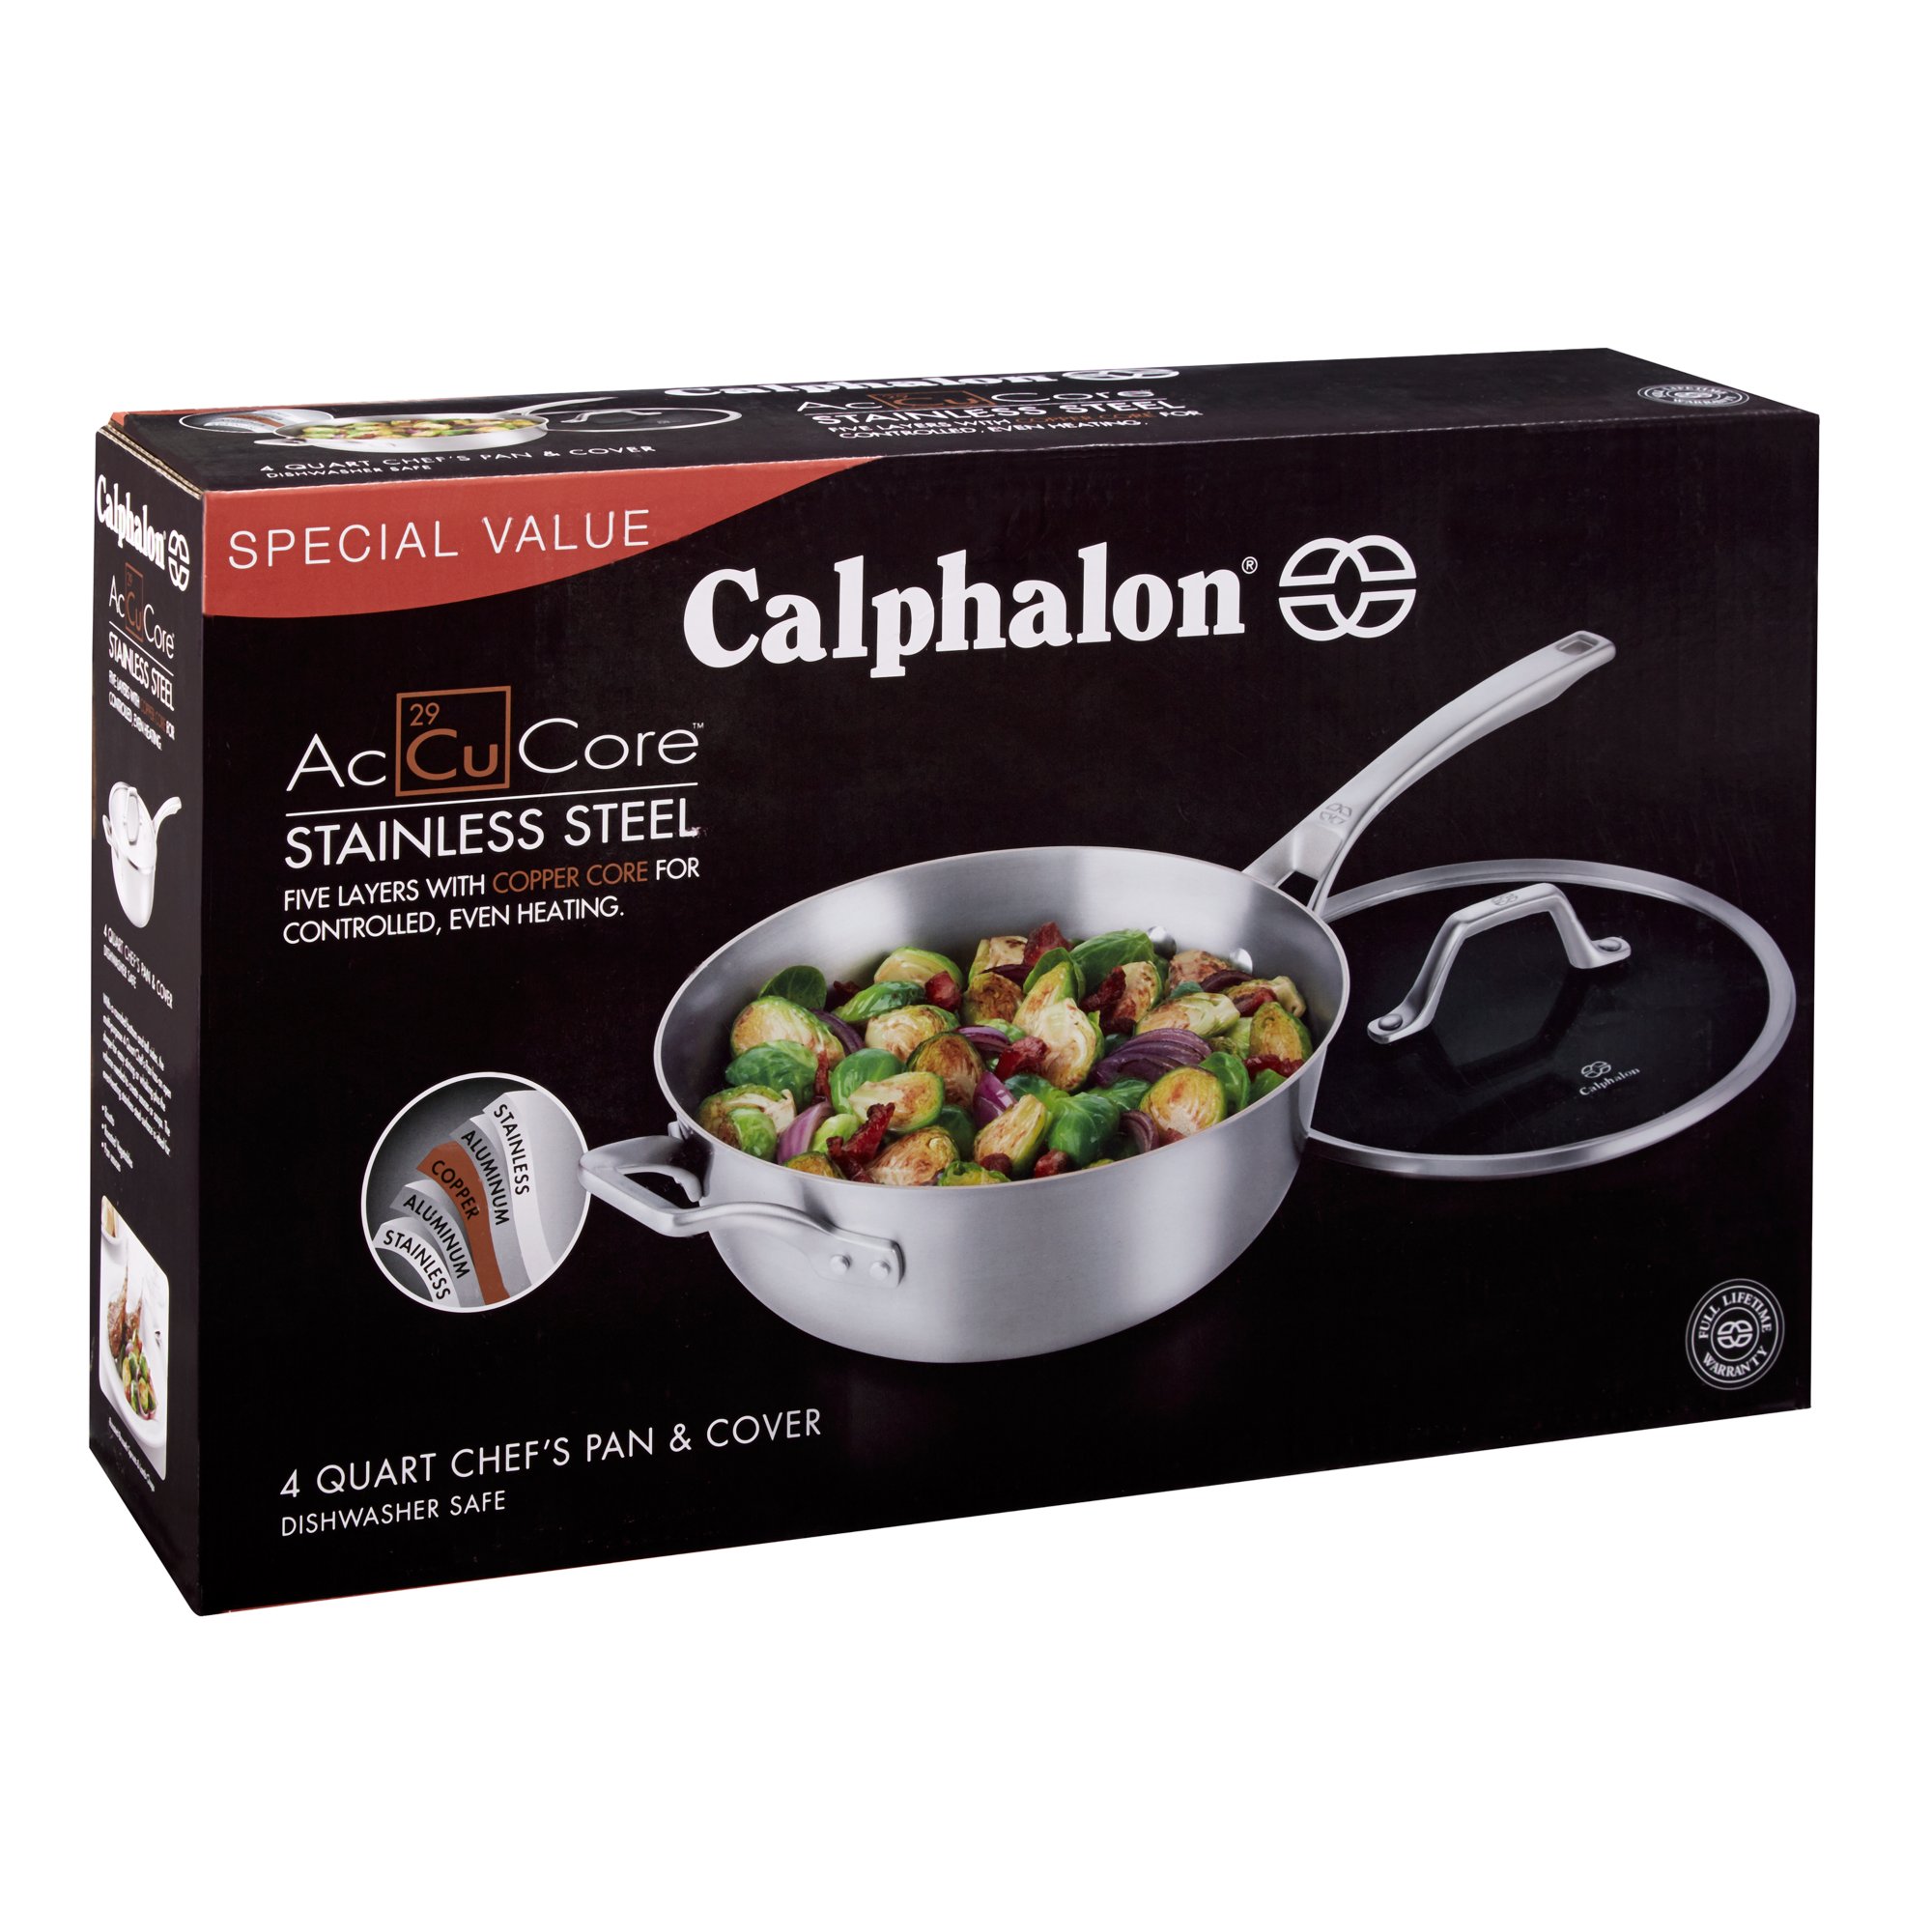 https://newellbrands.scene7.com/is/image/NewellRubbermaid/1833880-calphalon-cookware-ss-accucore-package-angle?wid=2000&hei=2000